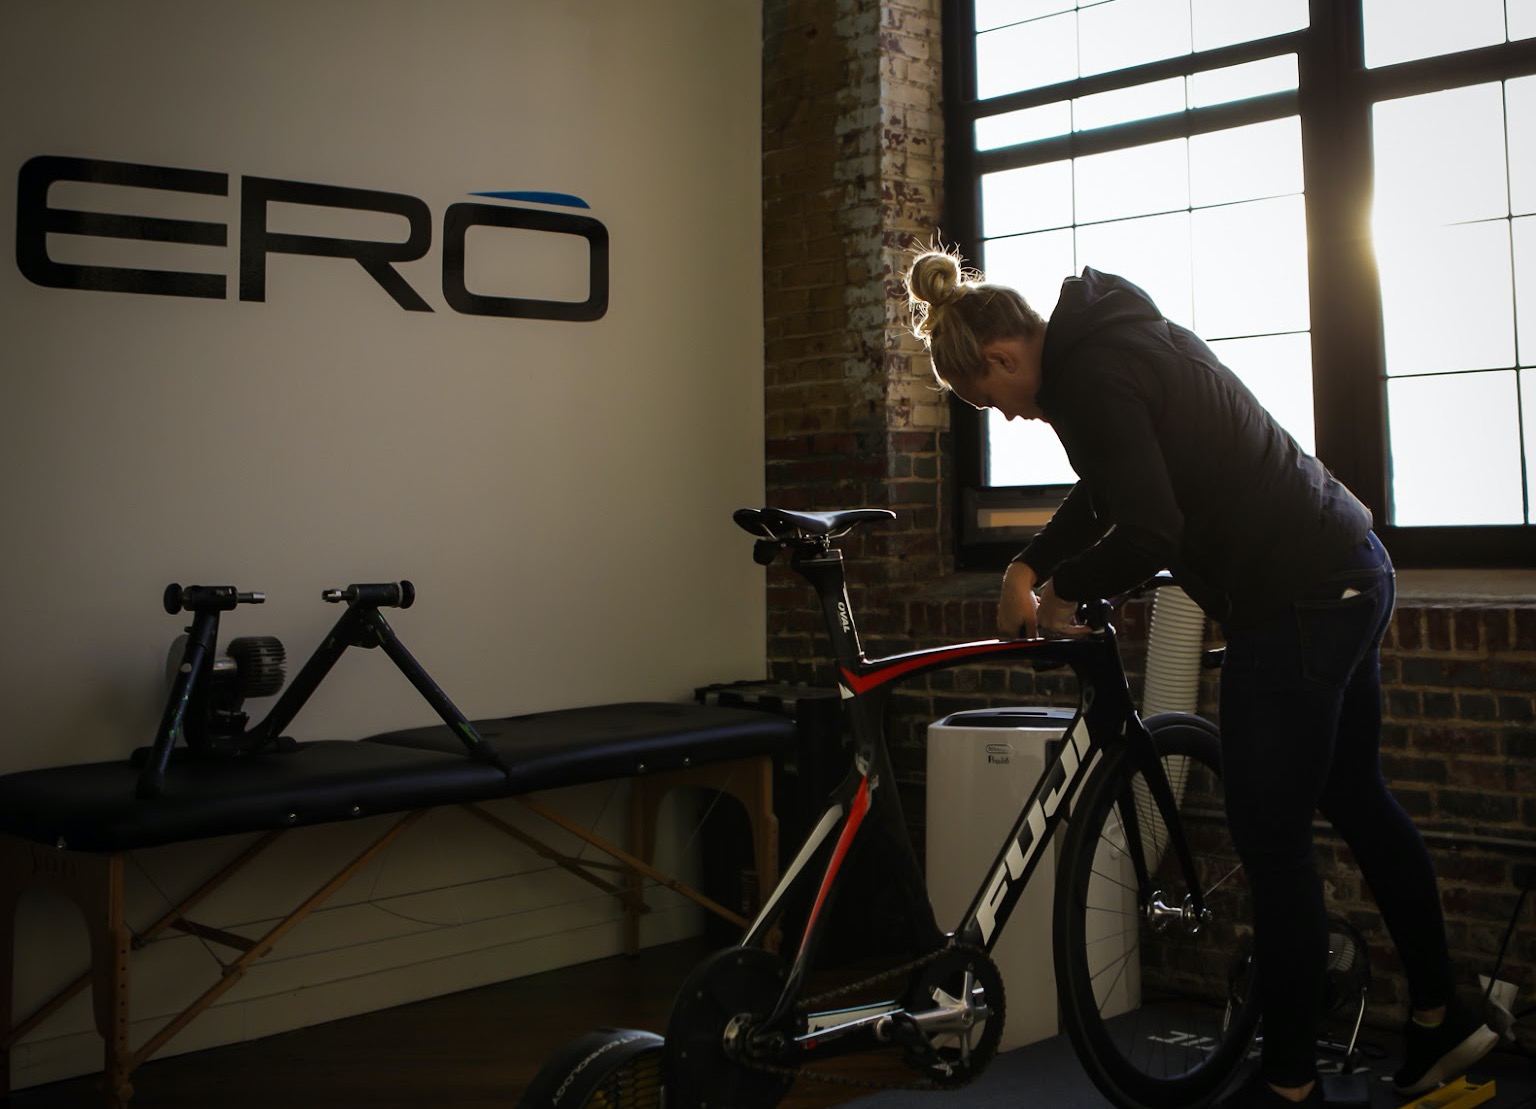 Elite bike fitting expert Missy Erickson from ERO Sports opens the hood on the art and science of a proper bike fitting